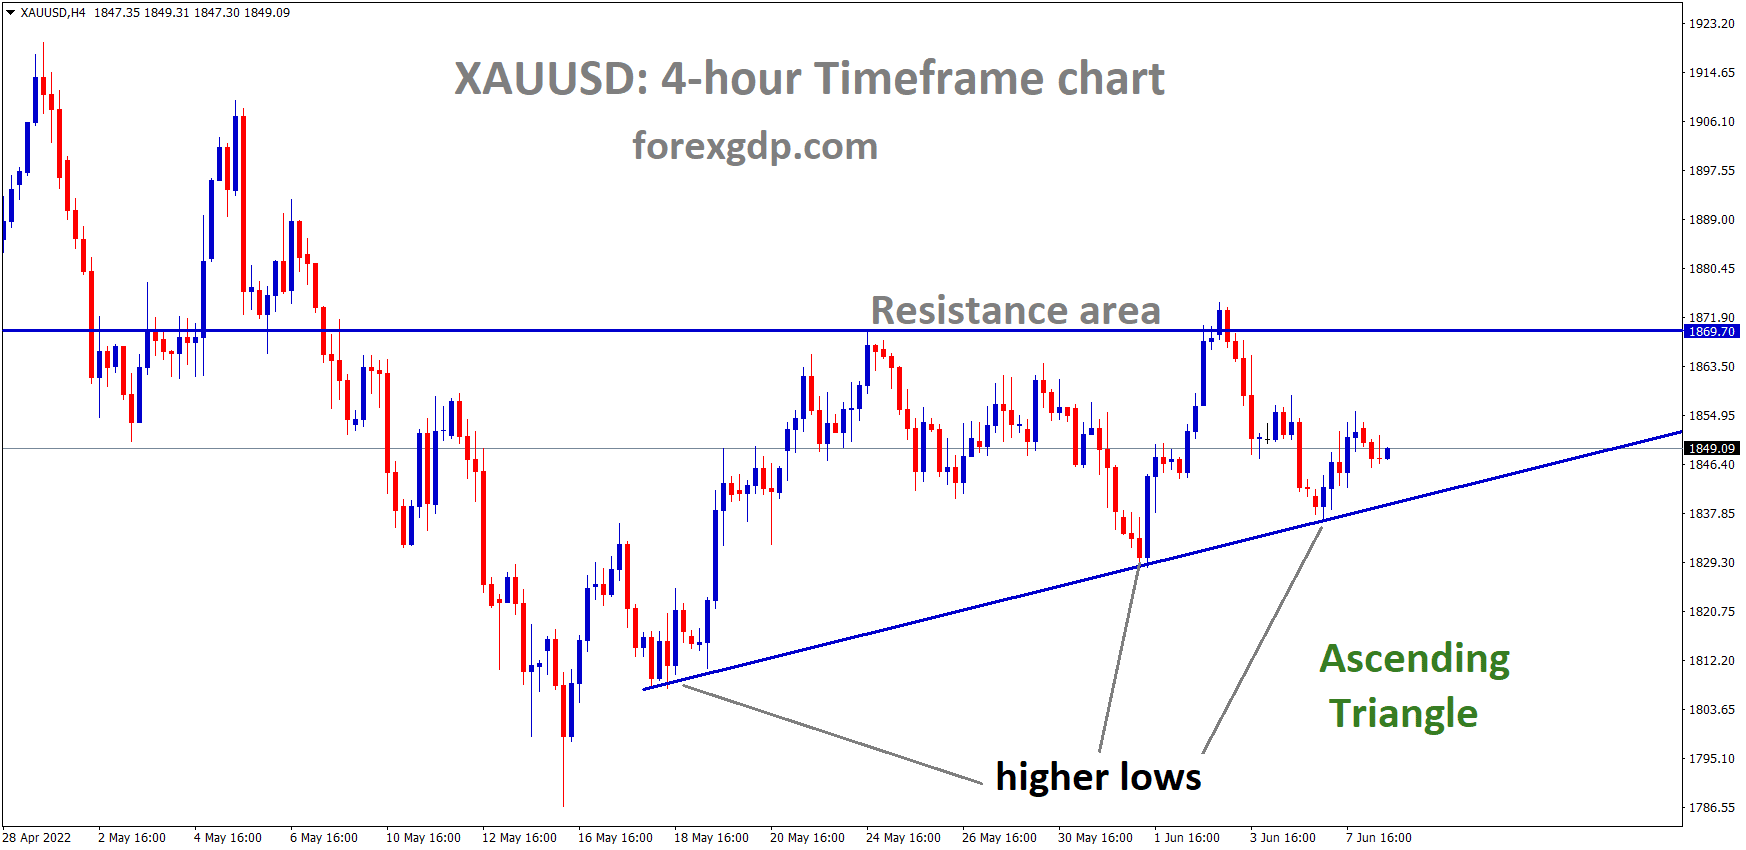 XAUUSD Gold price is moving in an Ascending triangle pattern and the market has rebounded from the higher low area of the triangle pattern.